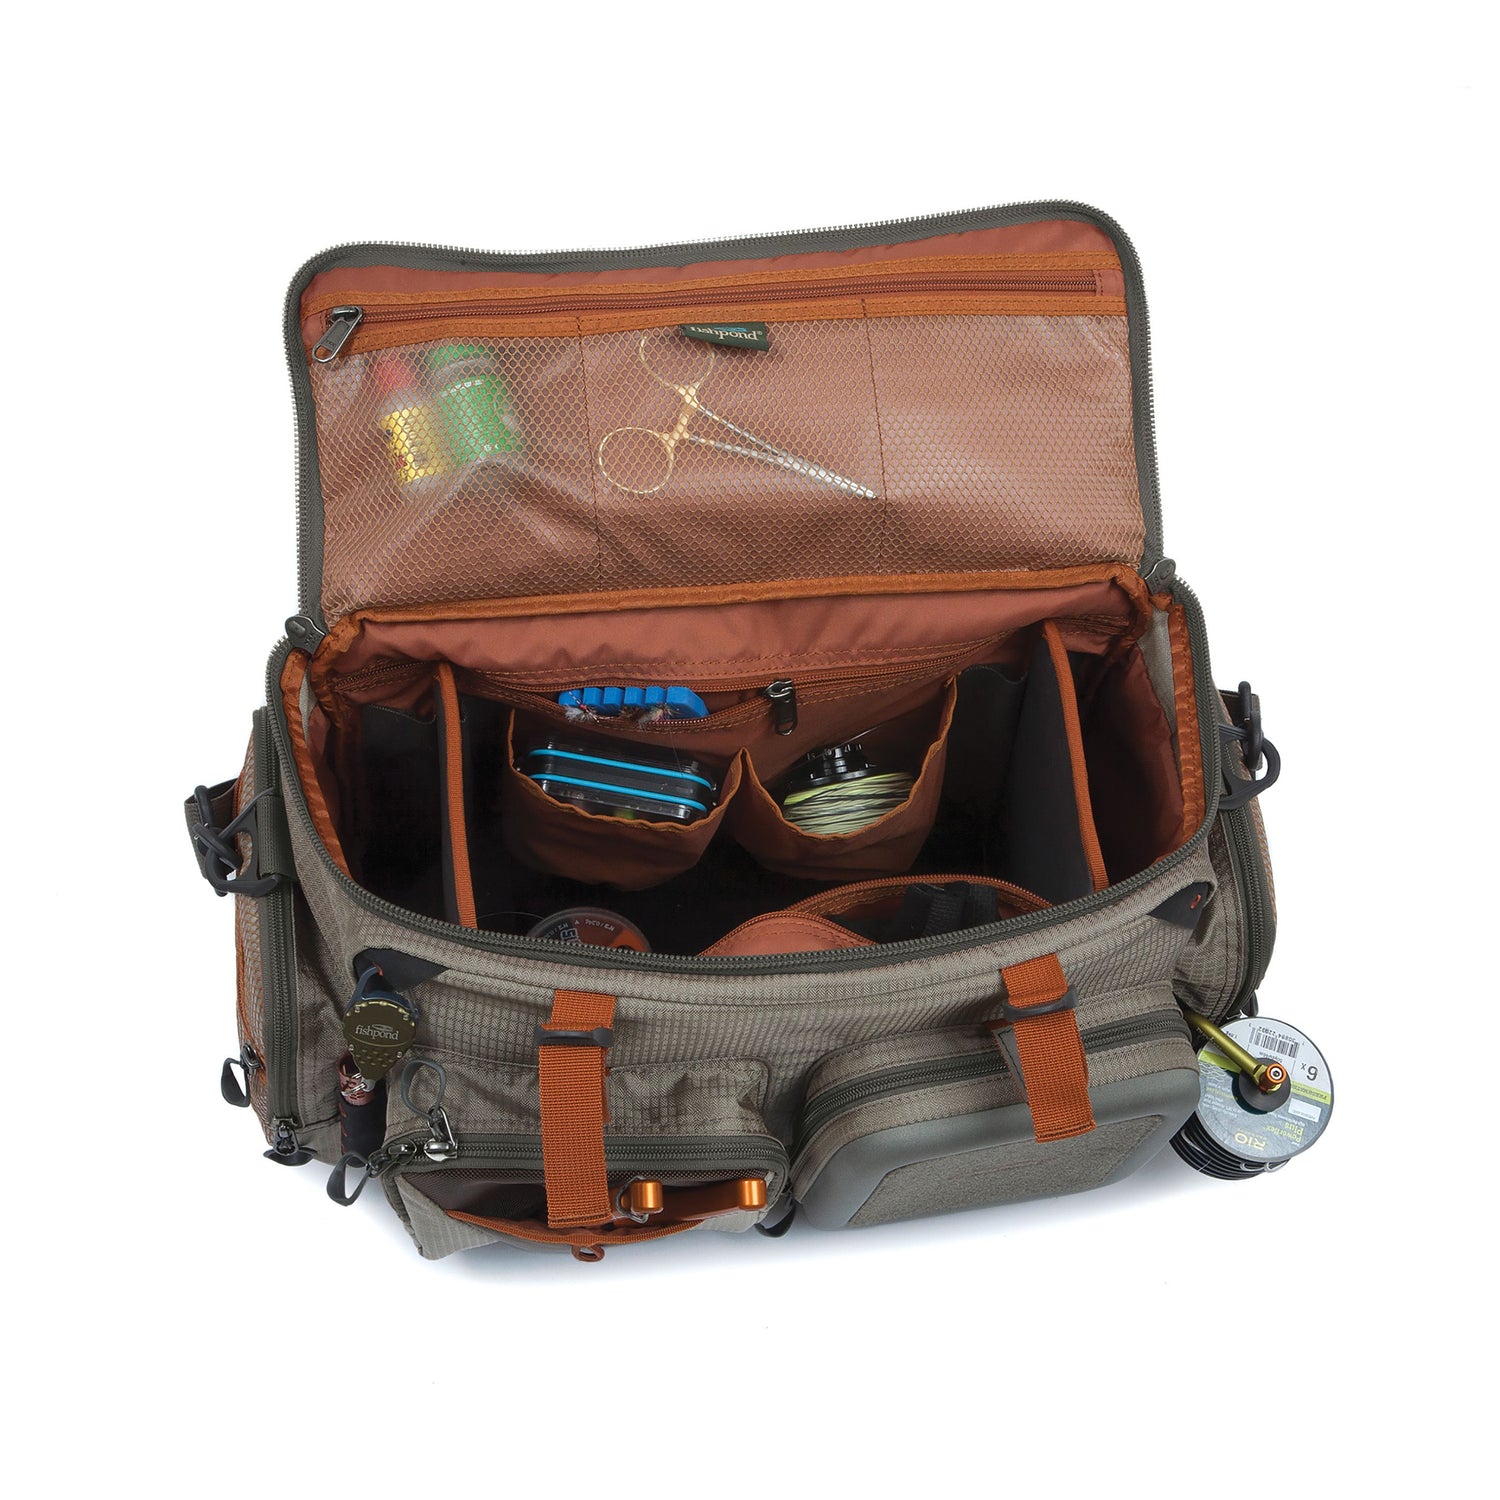  Fishpond Fly Fishing Accessories